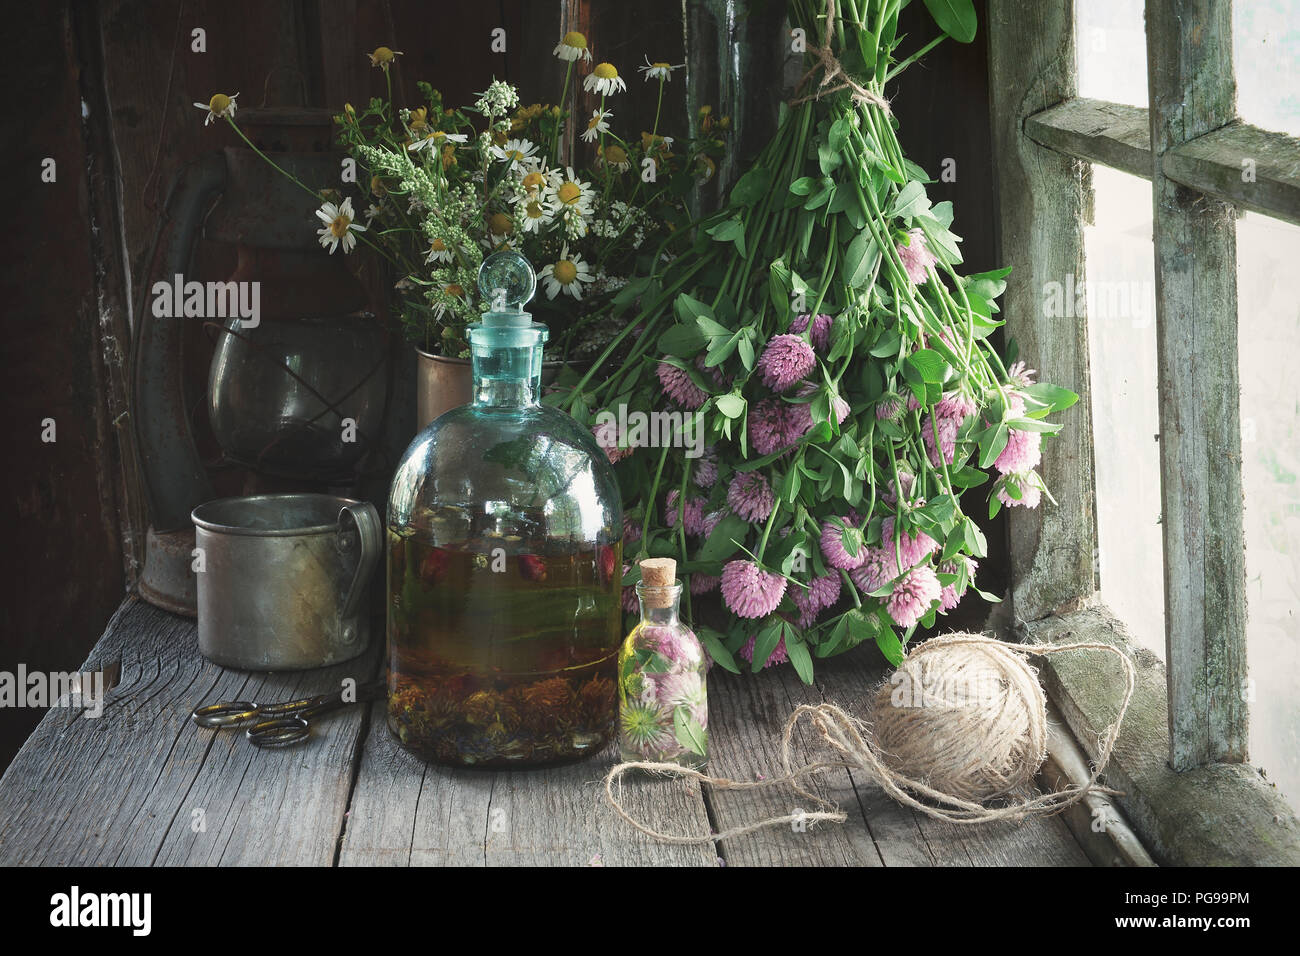 Clover tincture or infusion, essential oil bottle and medicinal herbs bunches near window inside the retro village house. Herbal medicine. Stock Photo